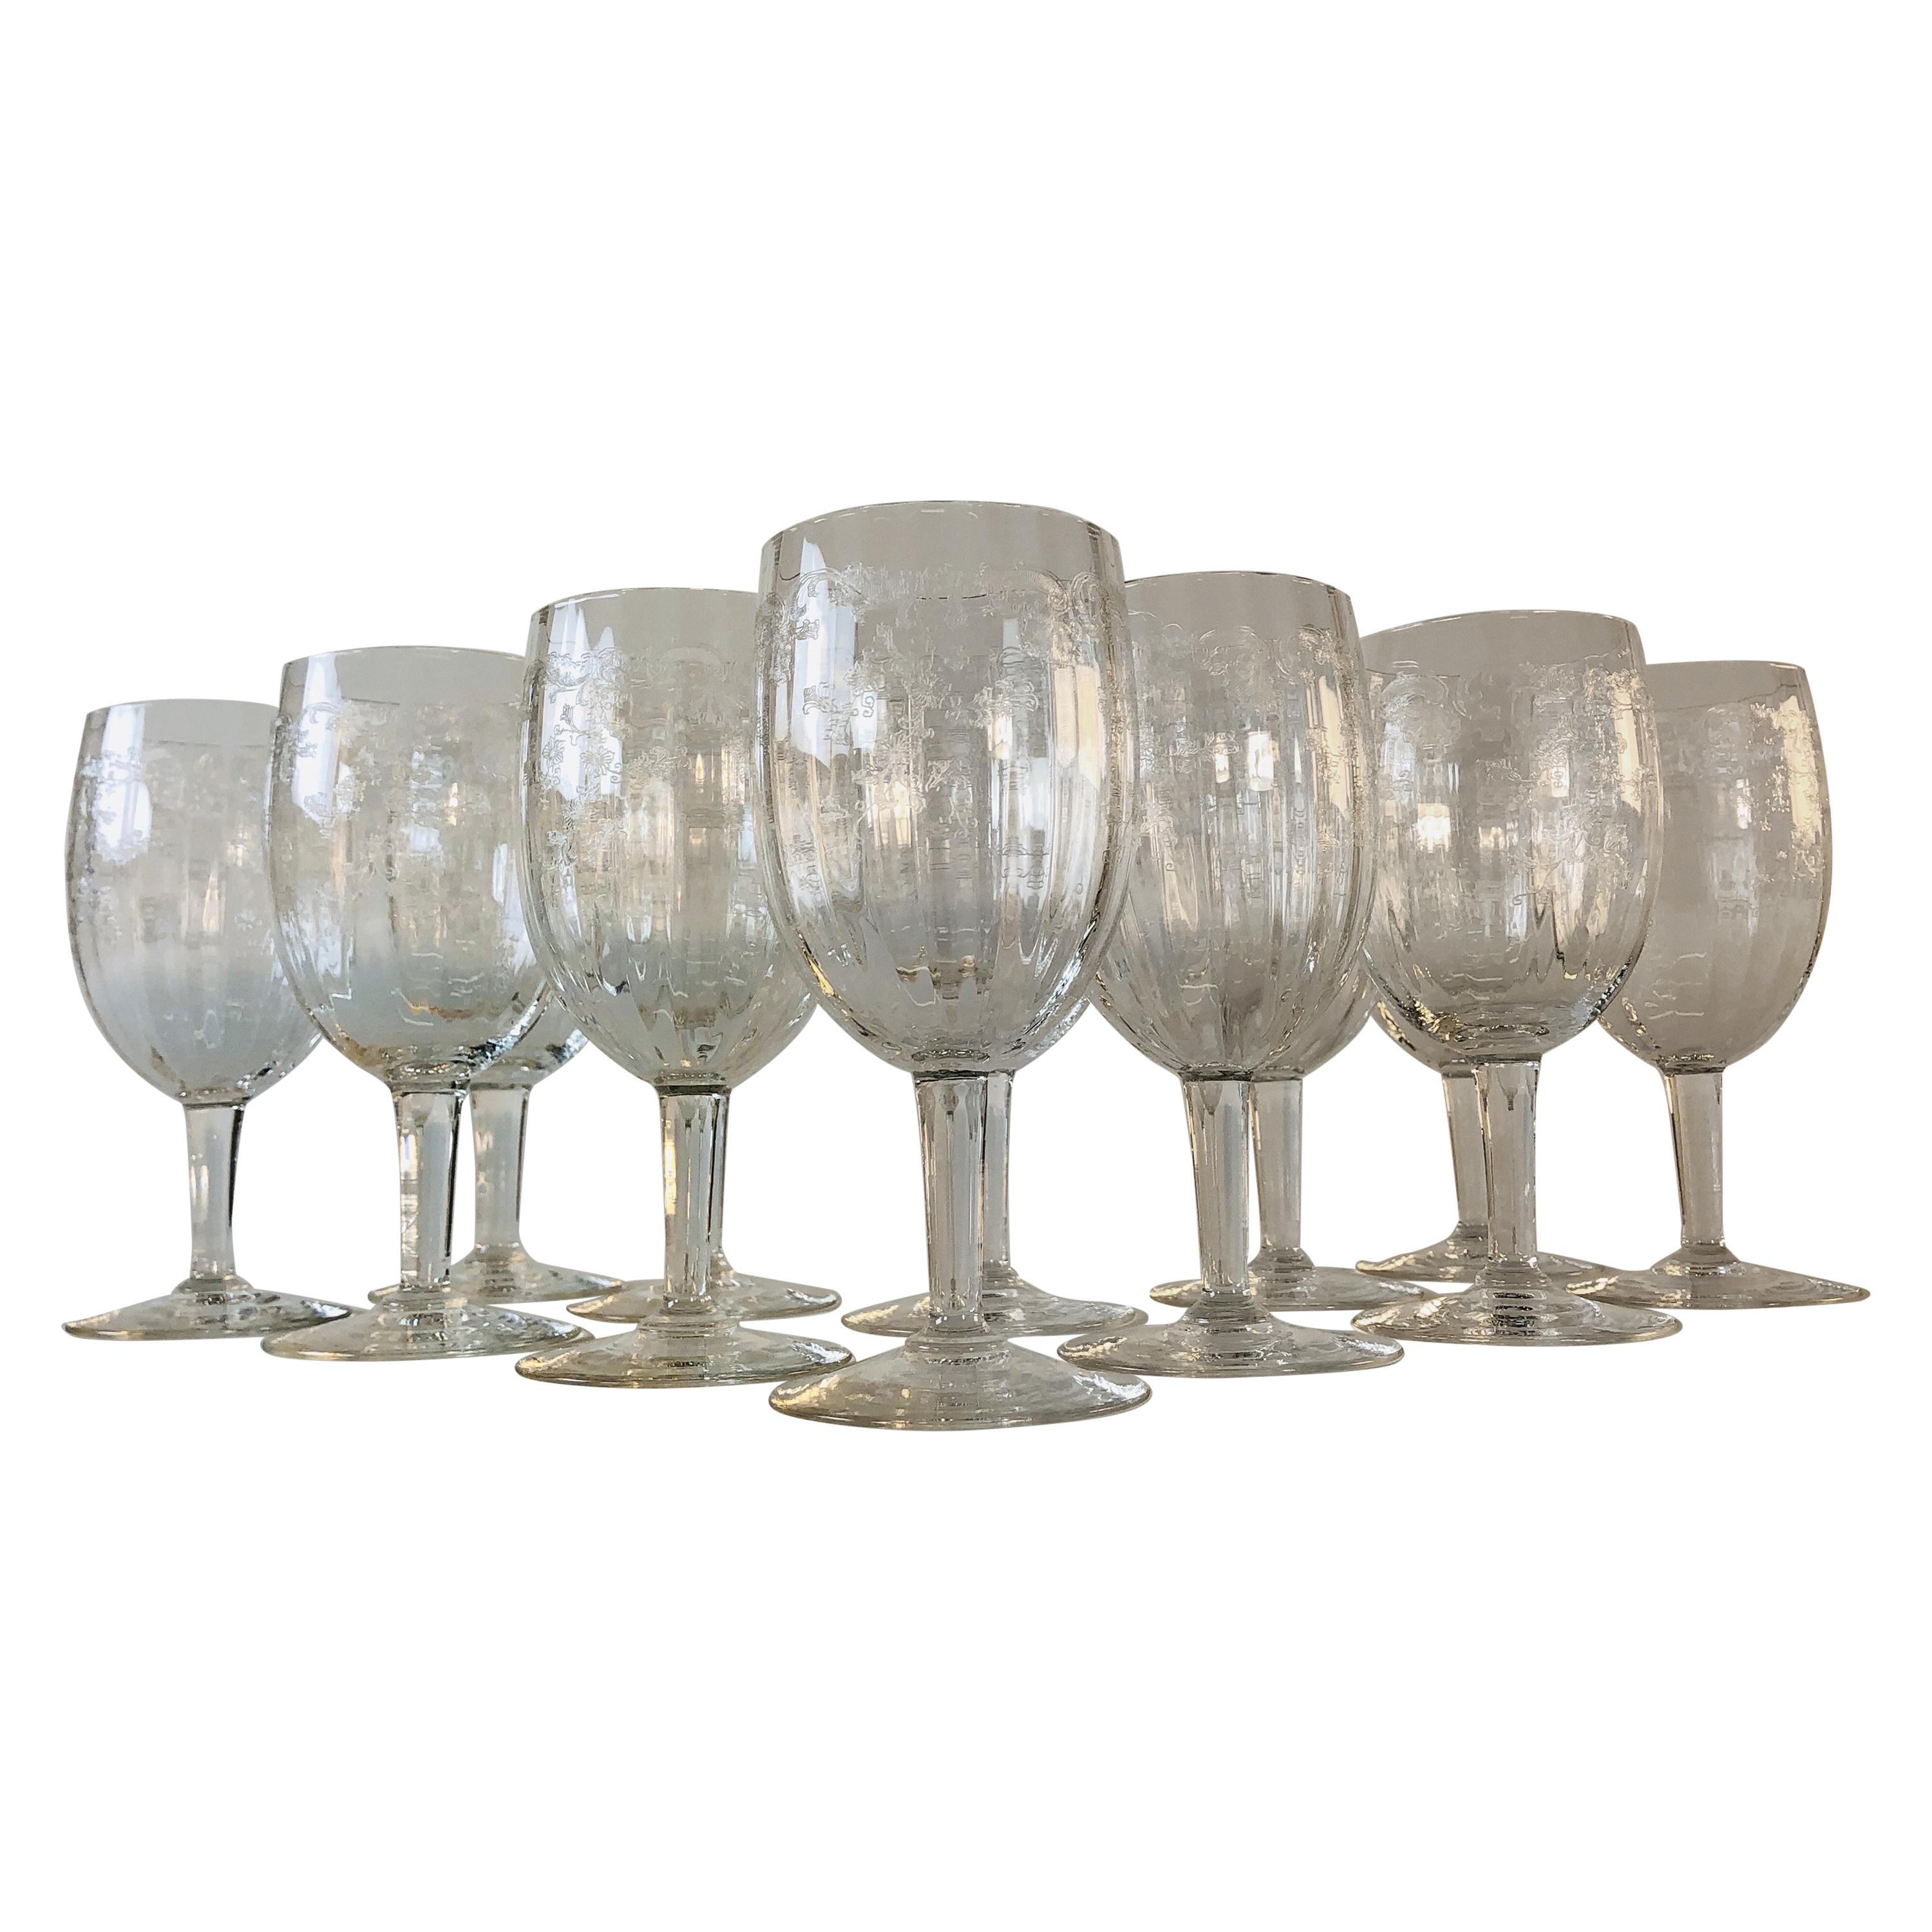 1950s Floral Etched Glass Wine Stems, Set of 12 For Sale